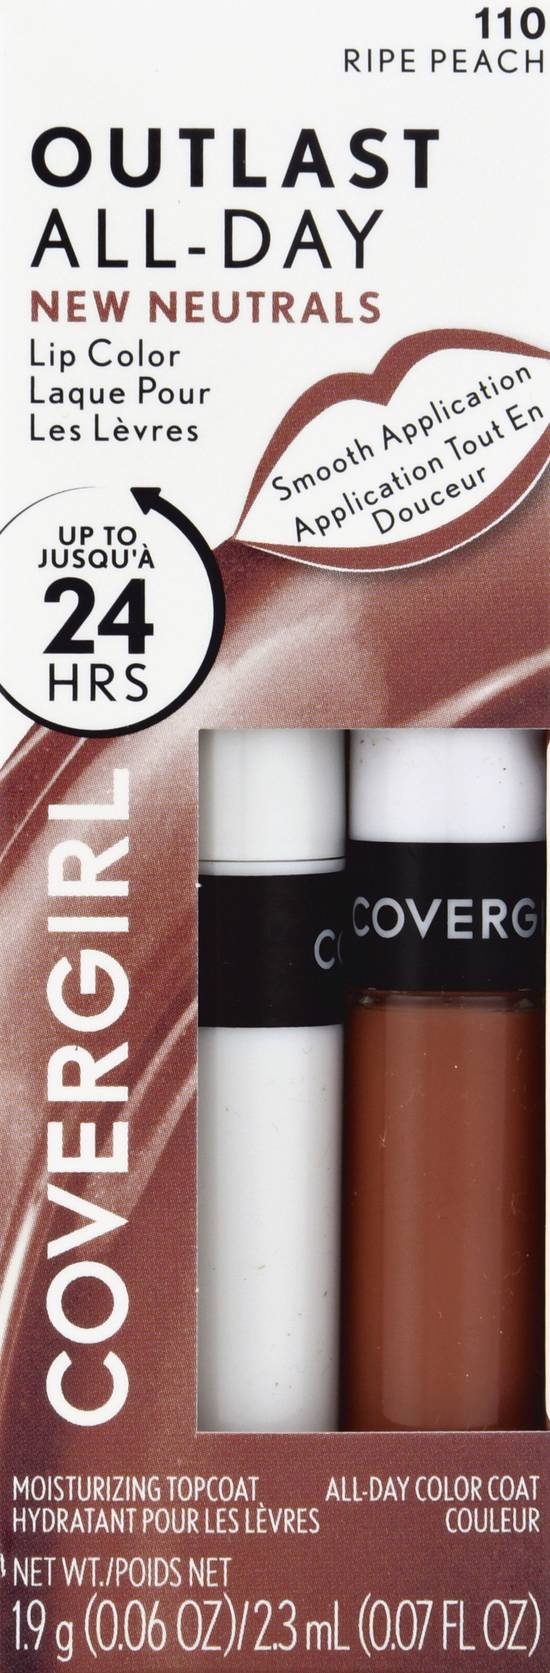 Covergirl Outlast All-Day Lip Color & Top Coat Ripe